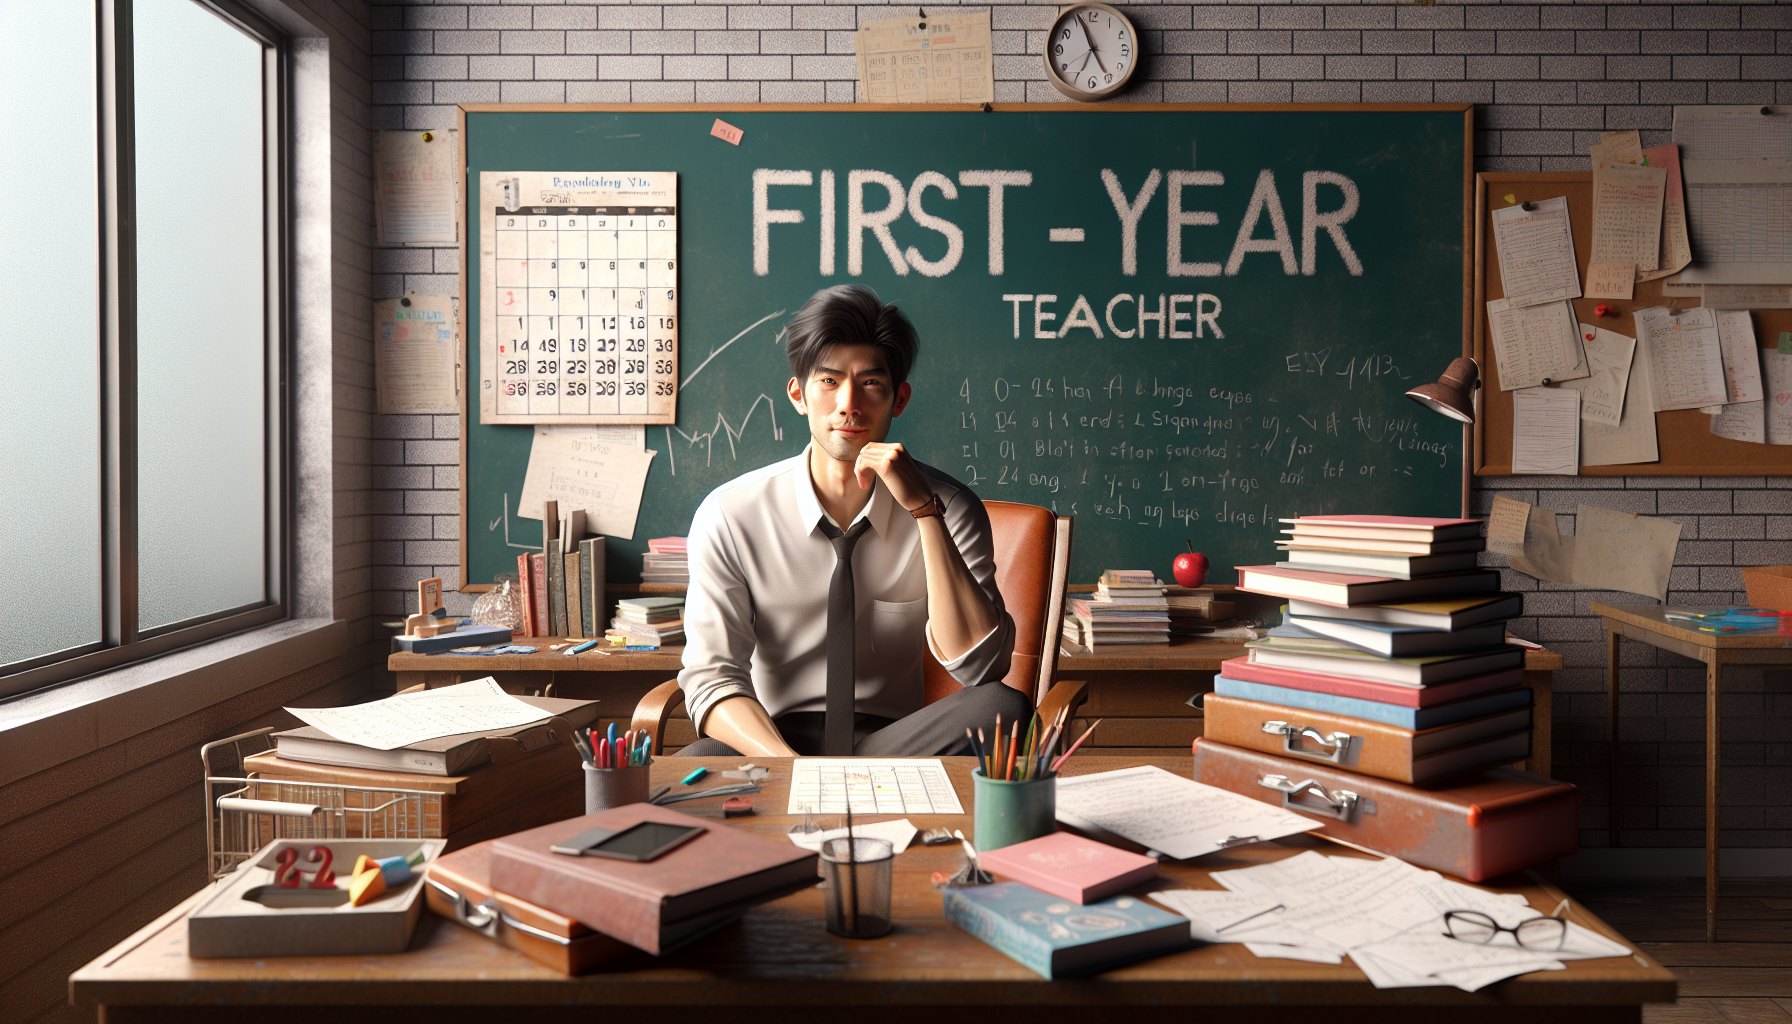 Reflections and Insights: Diary of a First-Year Teacher&#8217;s First Year Journey